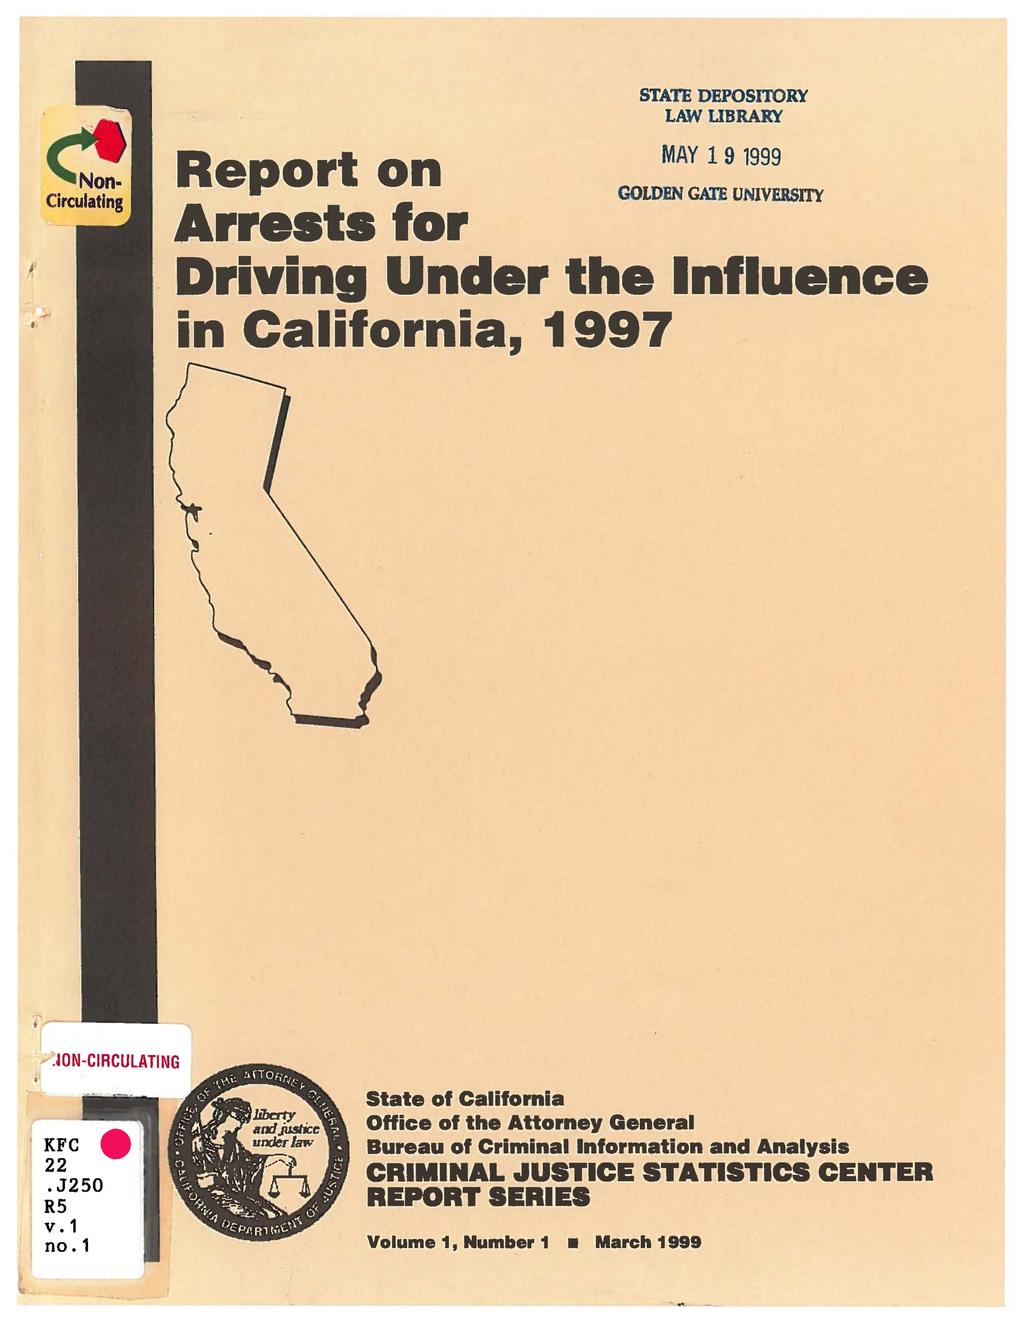 I STATE DEPOSITORY LAWUBRARY MAY 19 1999 Report on GOLDEN GATE UNIVERSITY Arrests for Driving Under the Influence in California, 1997.WN-CIRCULATING KFC 22.J250 R5 v. 1 no.